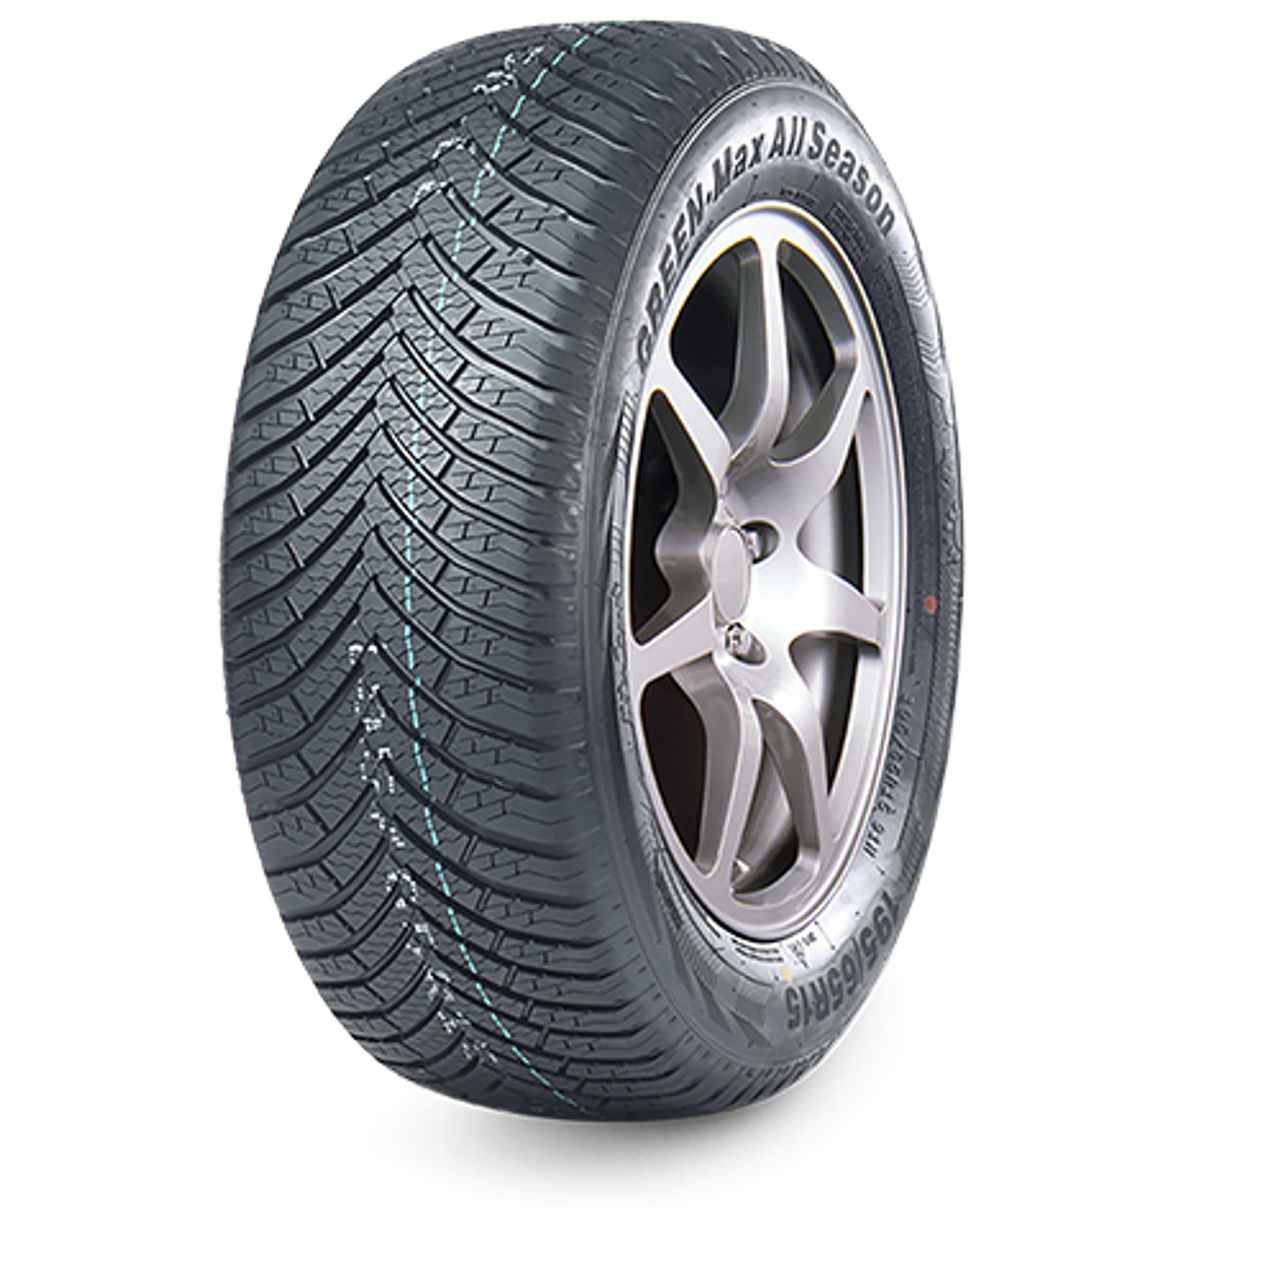 LINGLONG GREEN-MAX ALL SEASON 155/80R13 79T BSW